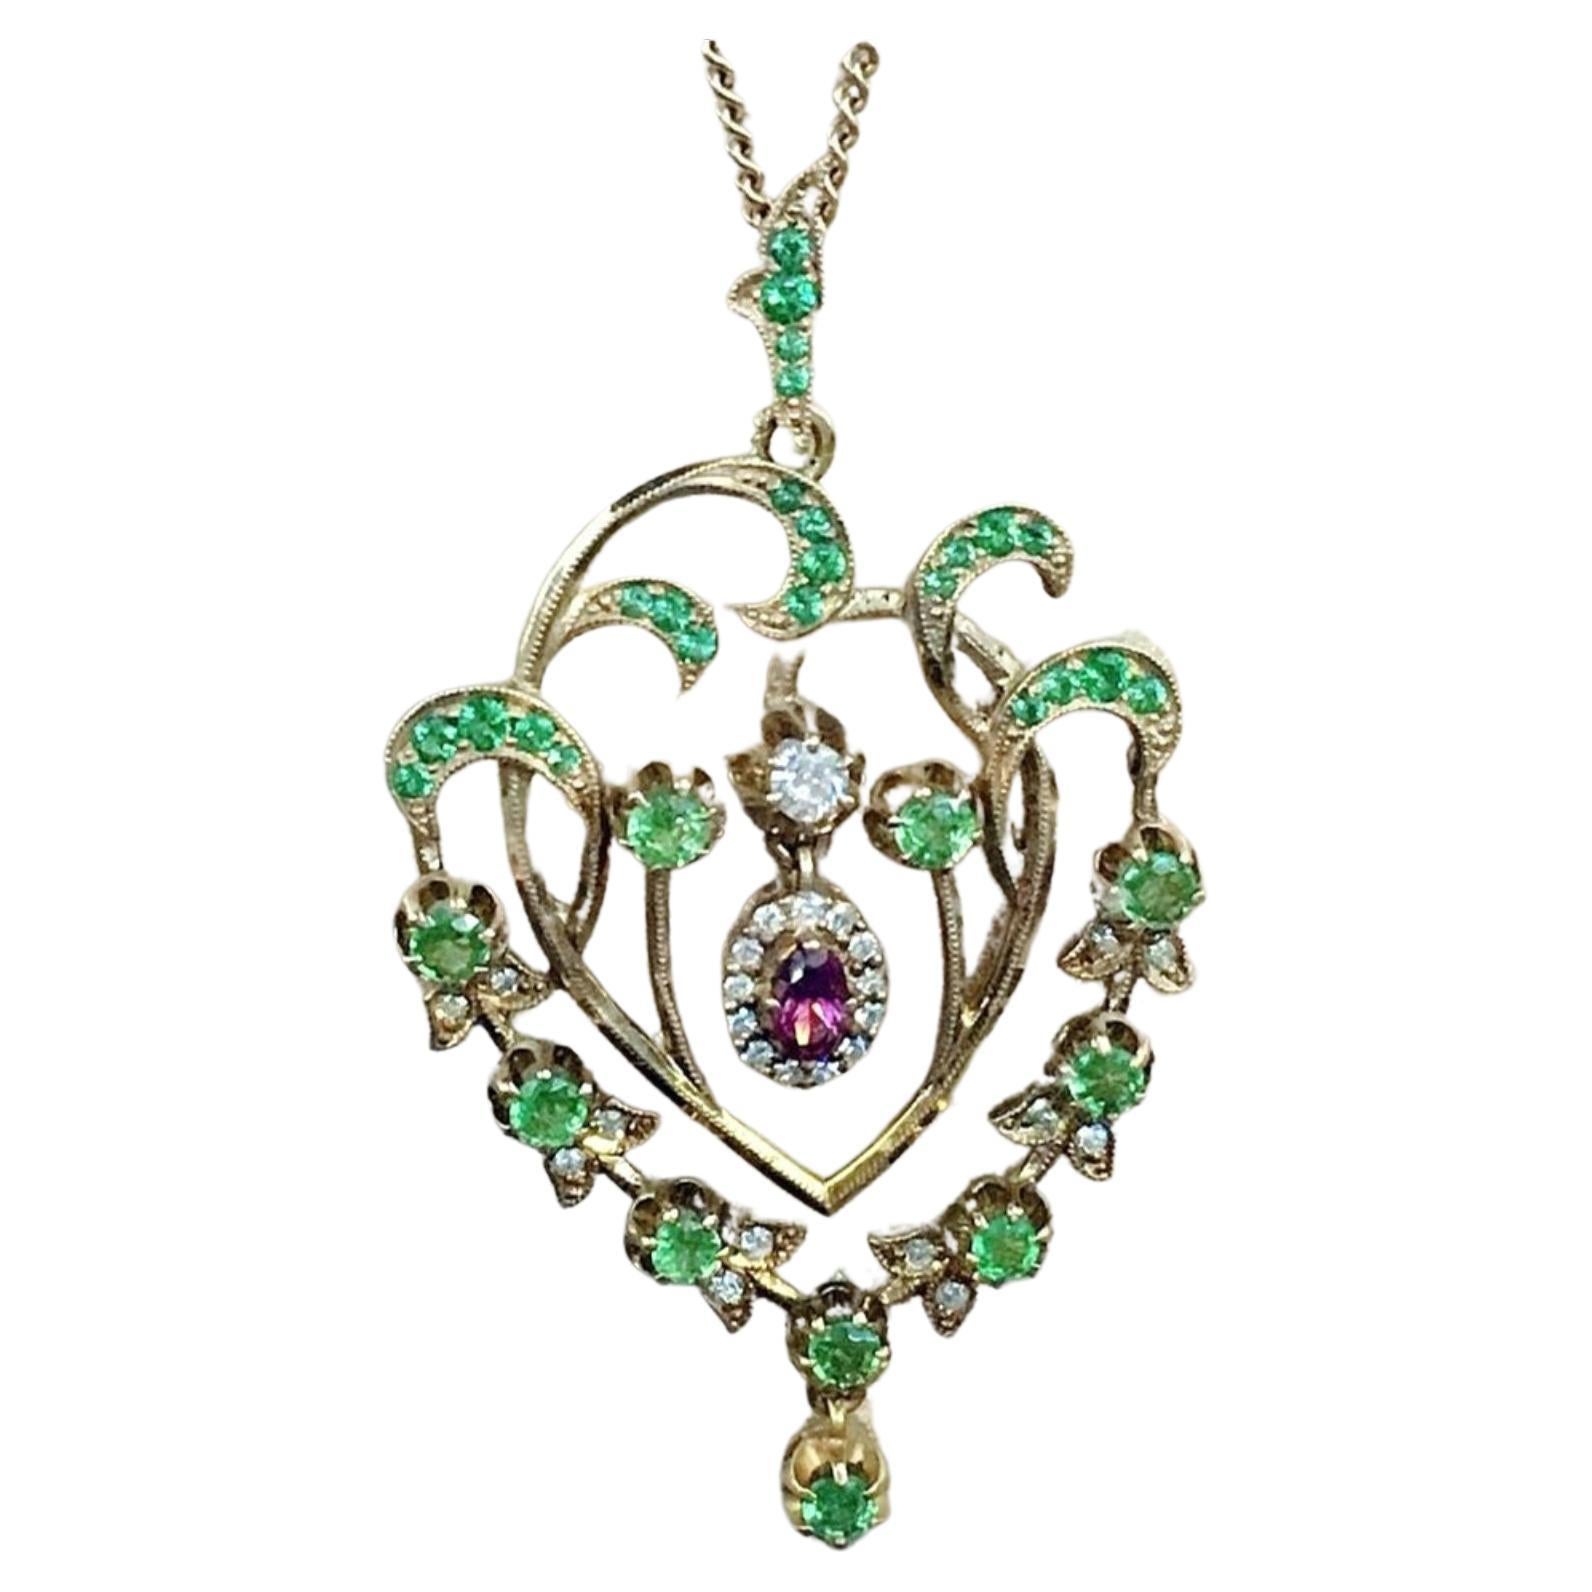 Antique large Russian natural green Demantoid garnet in artnovo style pendant centered with dangling tourmalin stone flanked with old cut diamonds H color white in 14k gold setting hall marked 56 imperial russian gold standard pendant dates back to